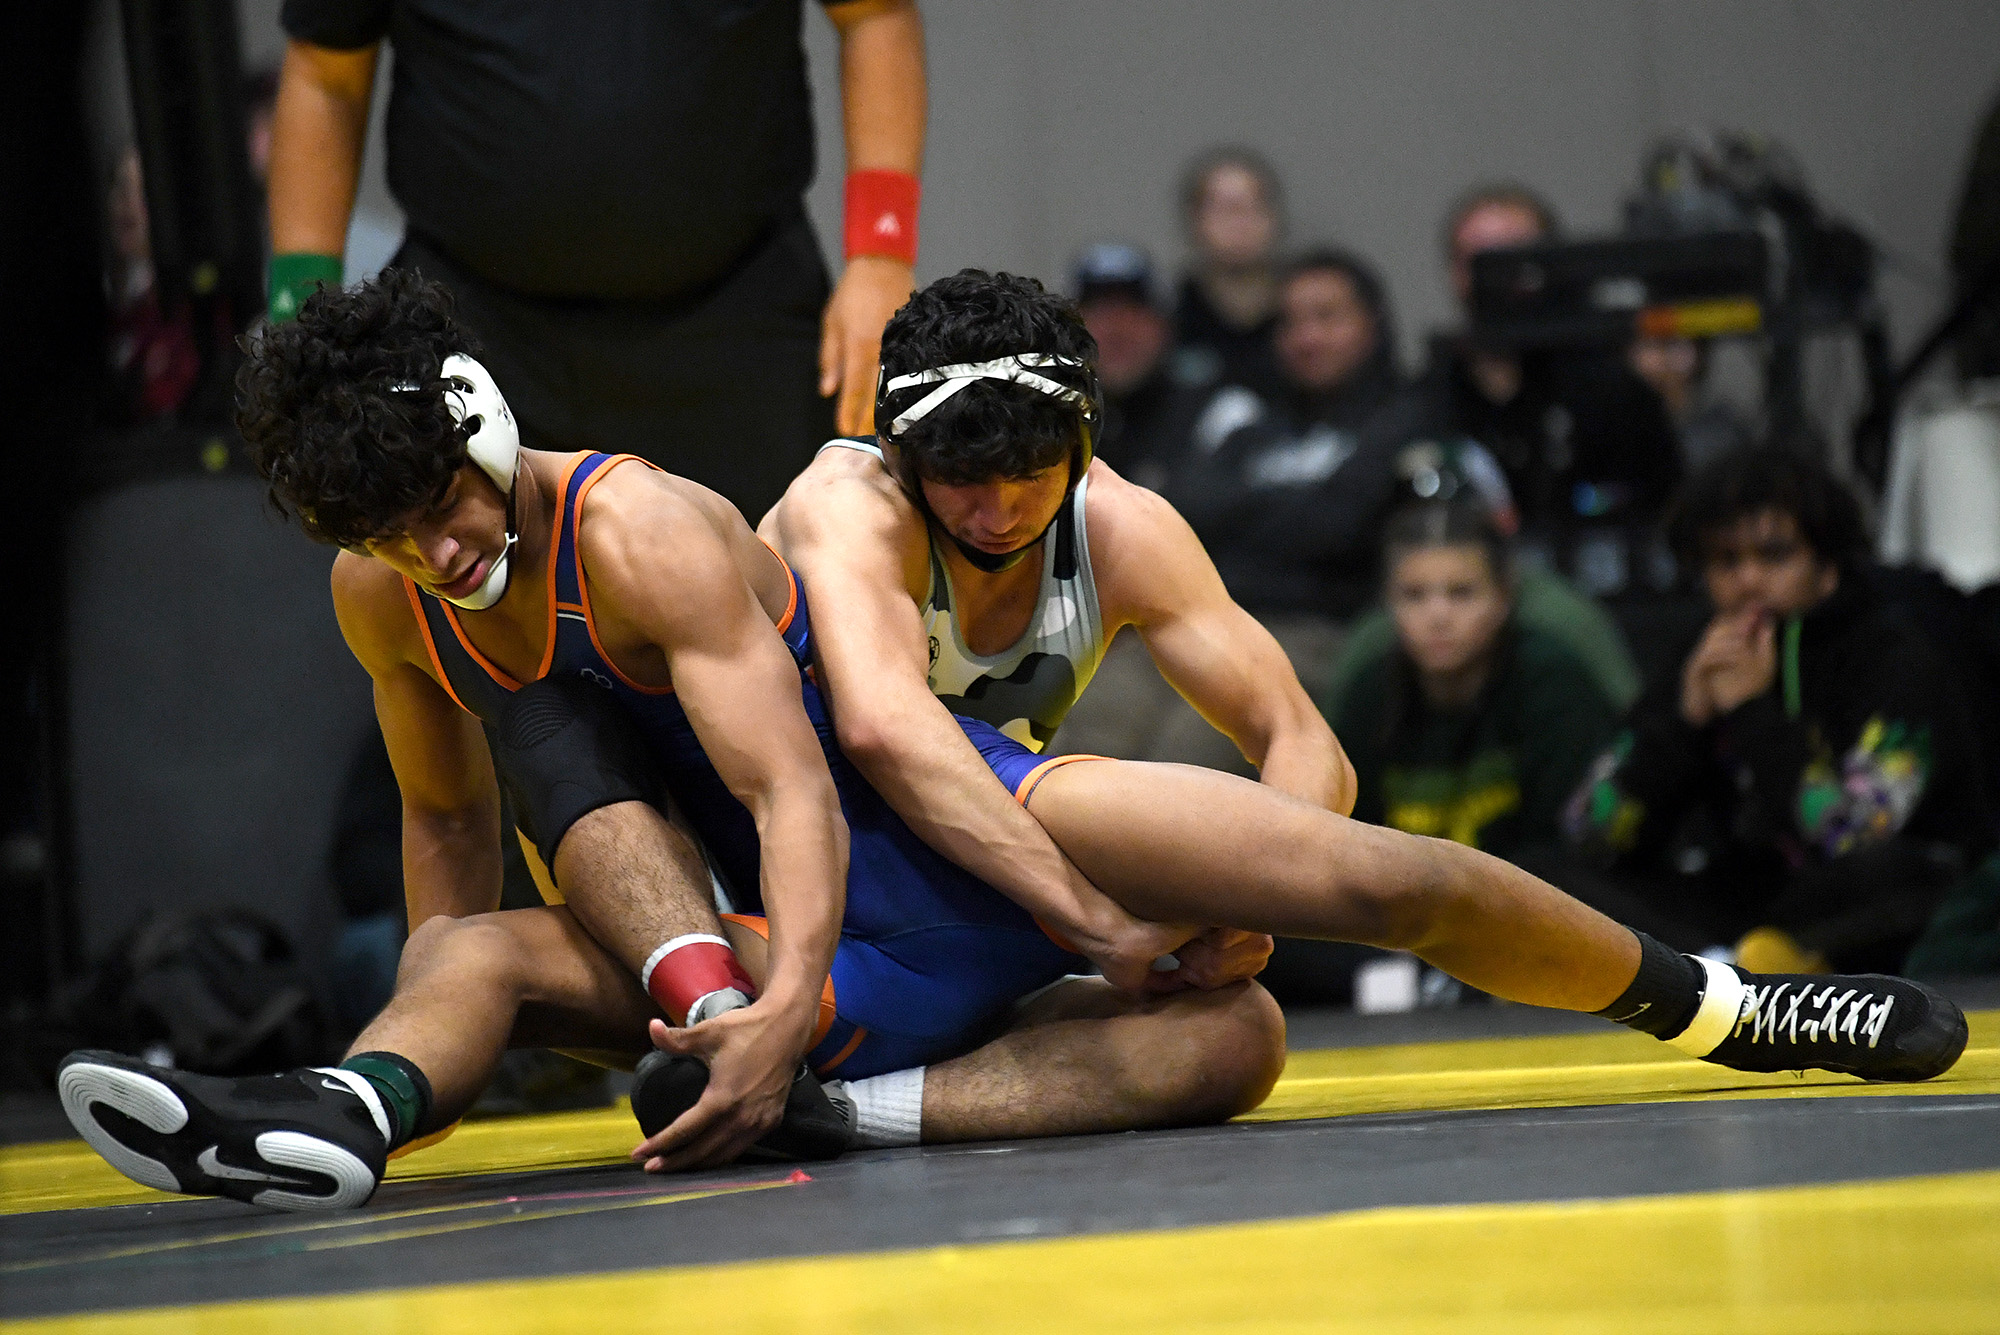 Union senior Armando Nicacio, right, wrestles with Graham-Kapowsin senior Devan Carter on Friday, Dec. 22, 2023, during the Pac Coast Wrestling Championships at the Clark County Event Center in Ridgefield. Carter won the 165-pound bout by decision, 5-0.